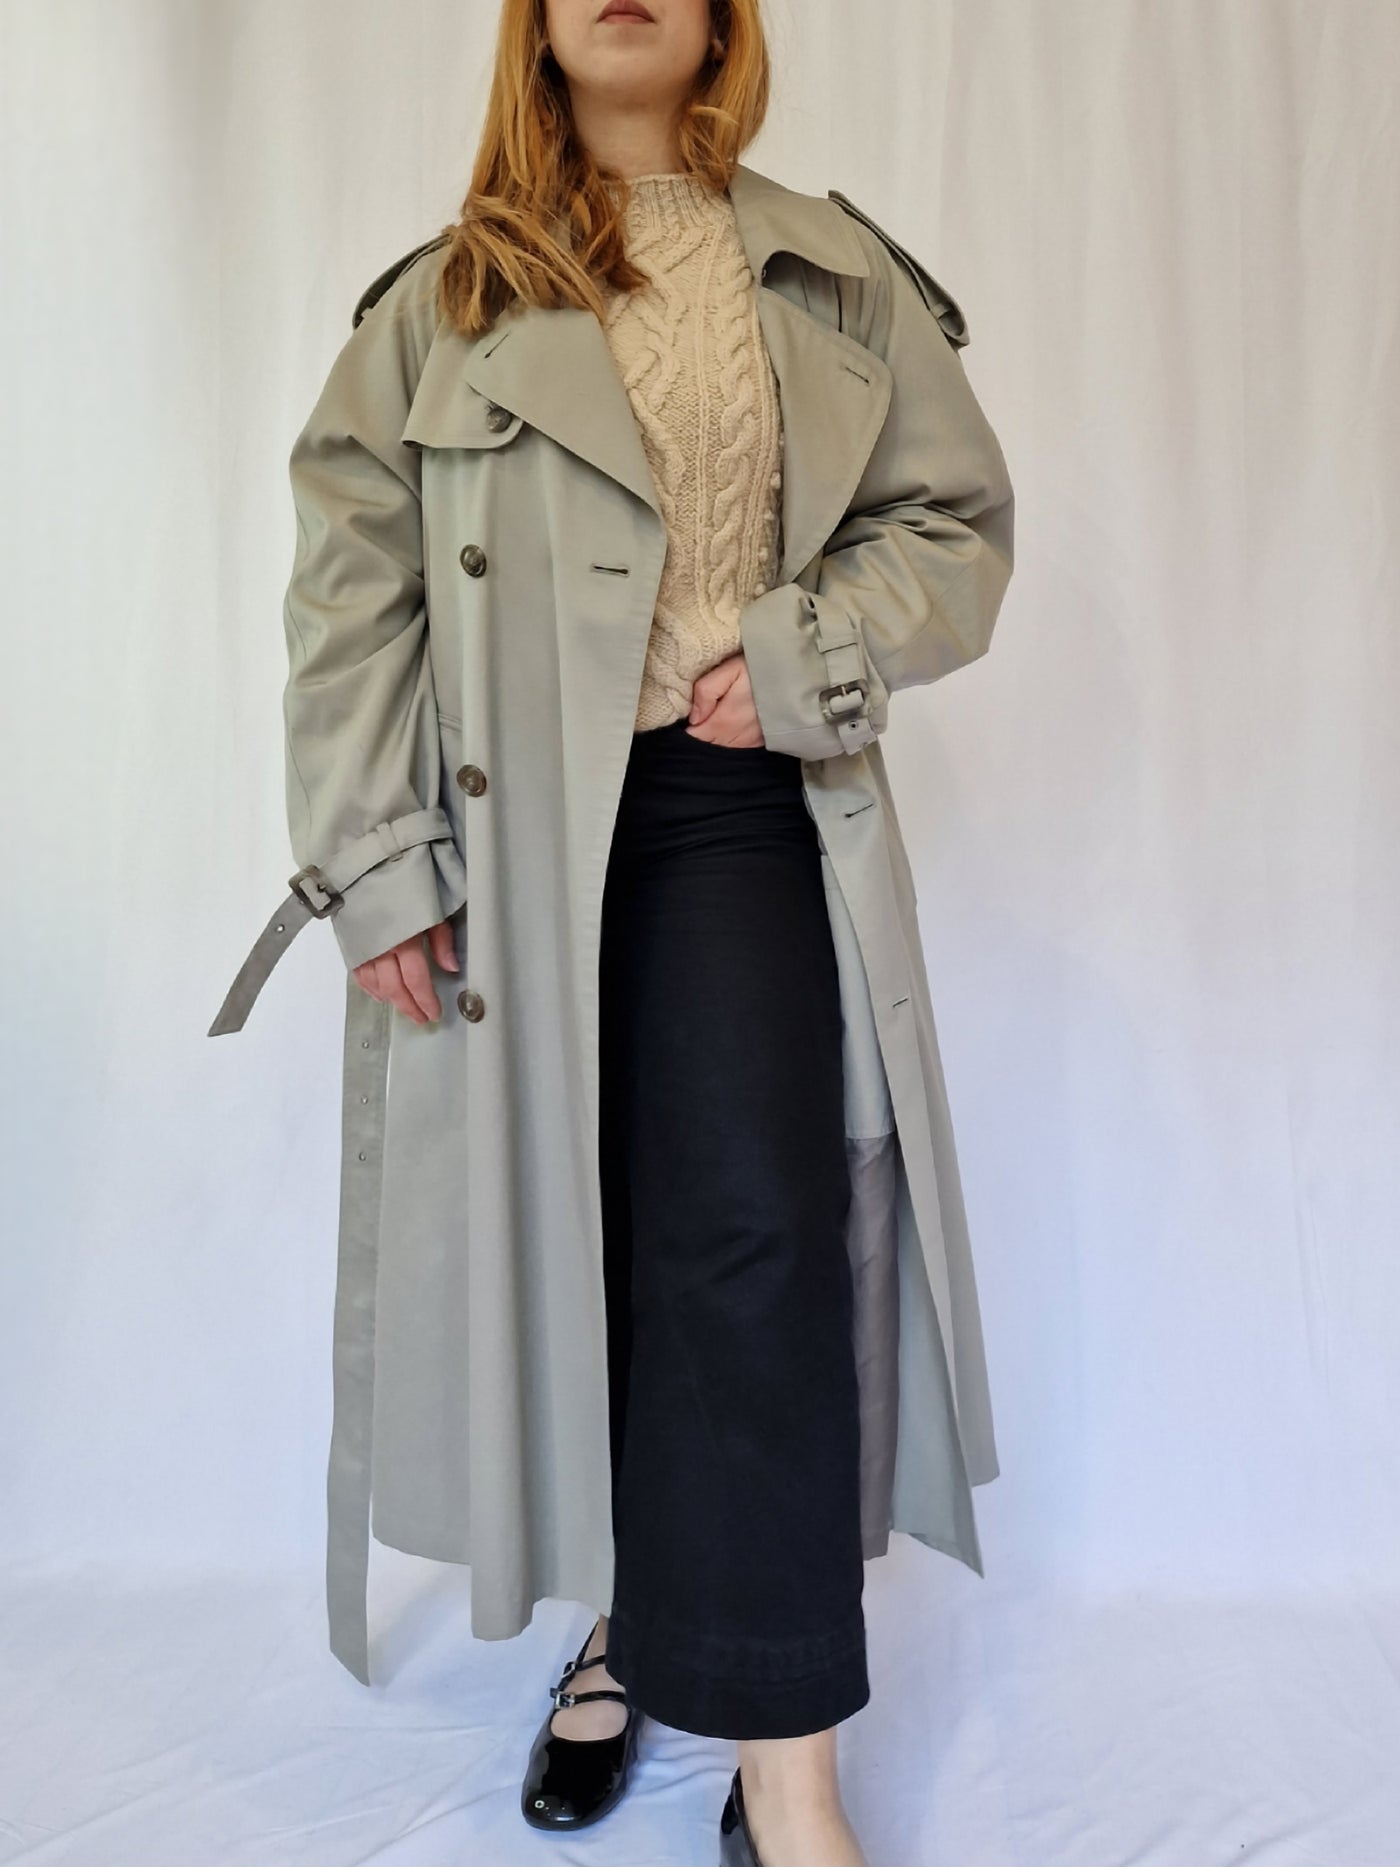 Vintage 80s Light Grey Single Breasted Trench Coat by Dannimac - XL